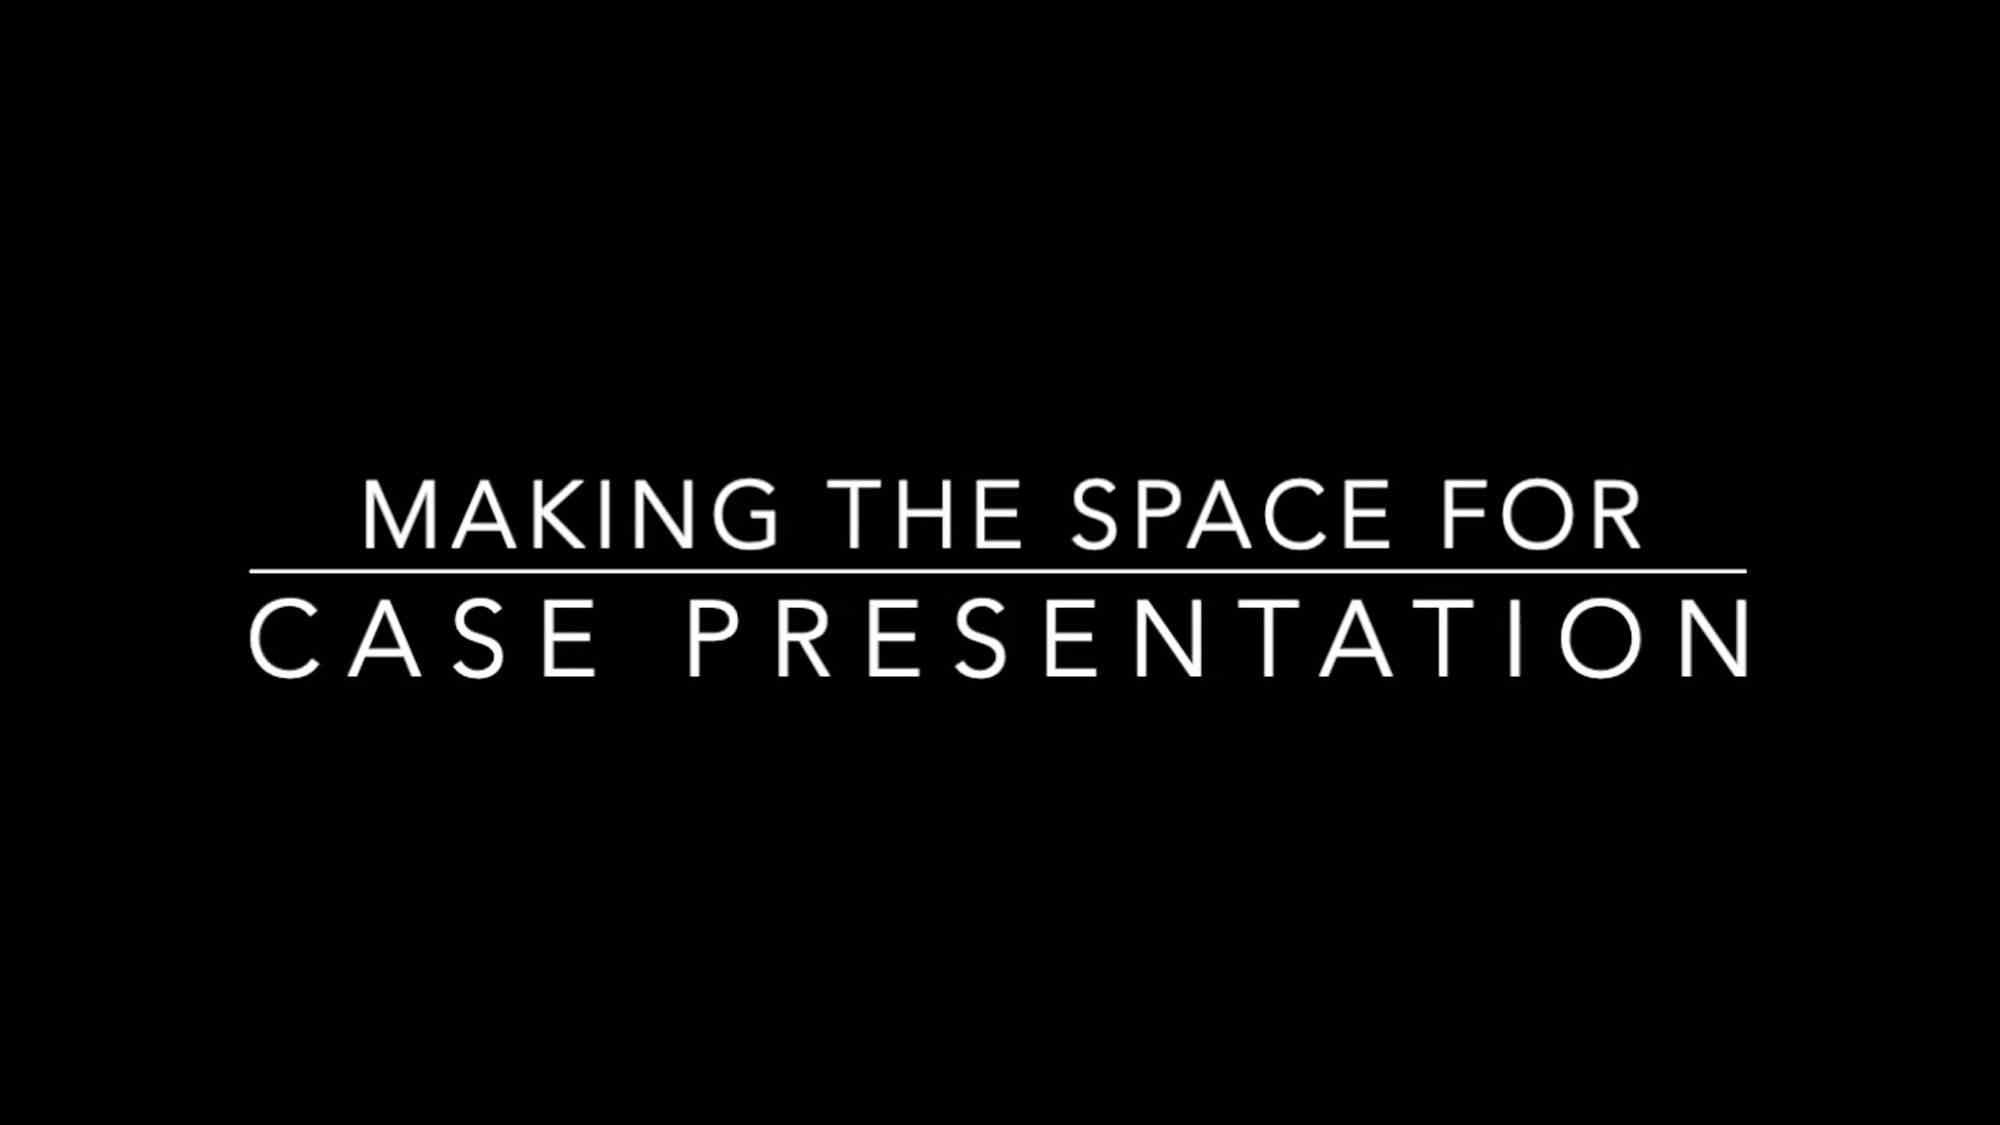 Therapy in 3 Minutes - Making the Space for Case Presentation